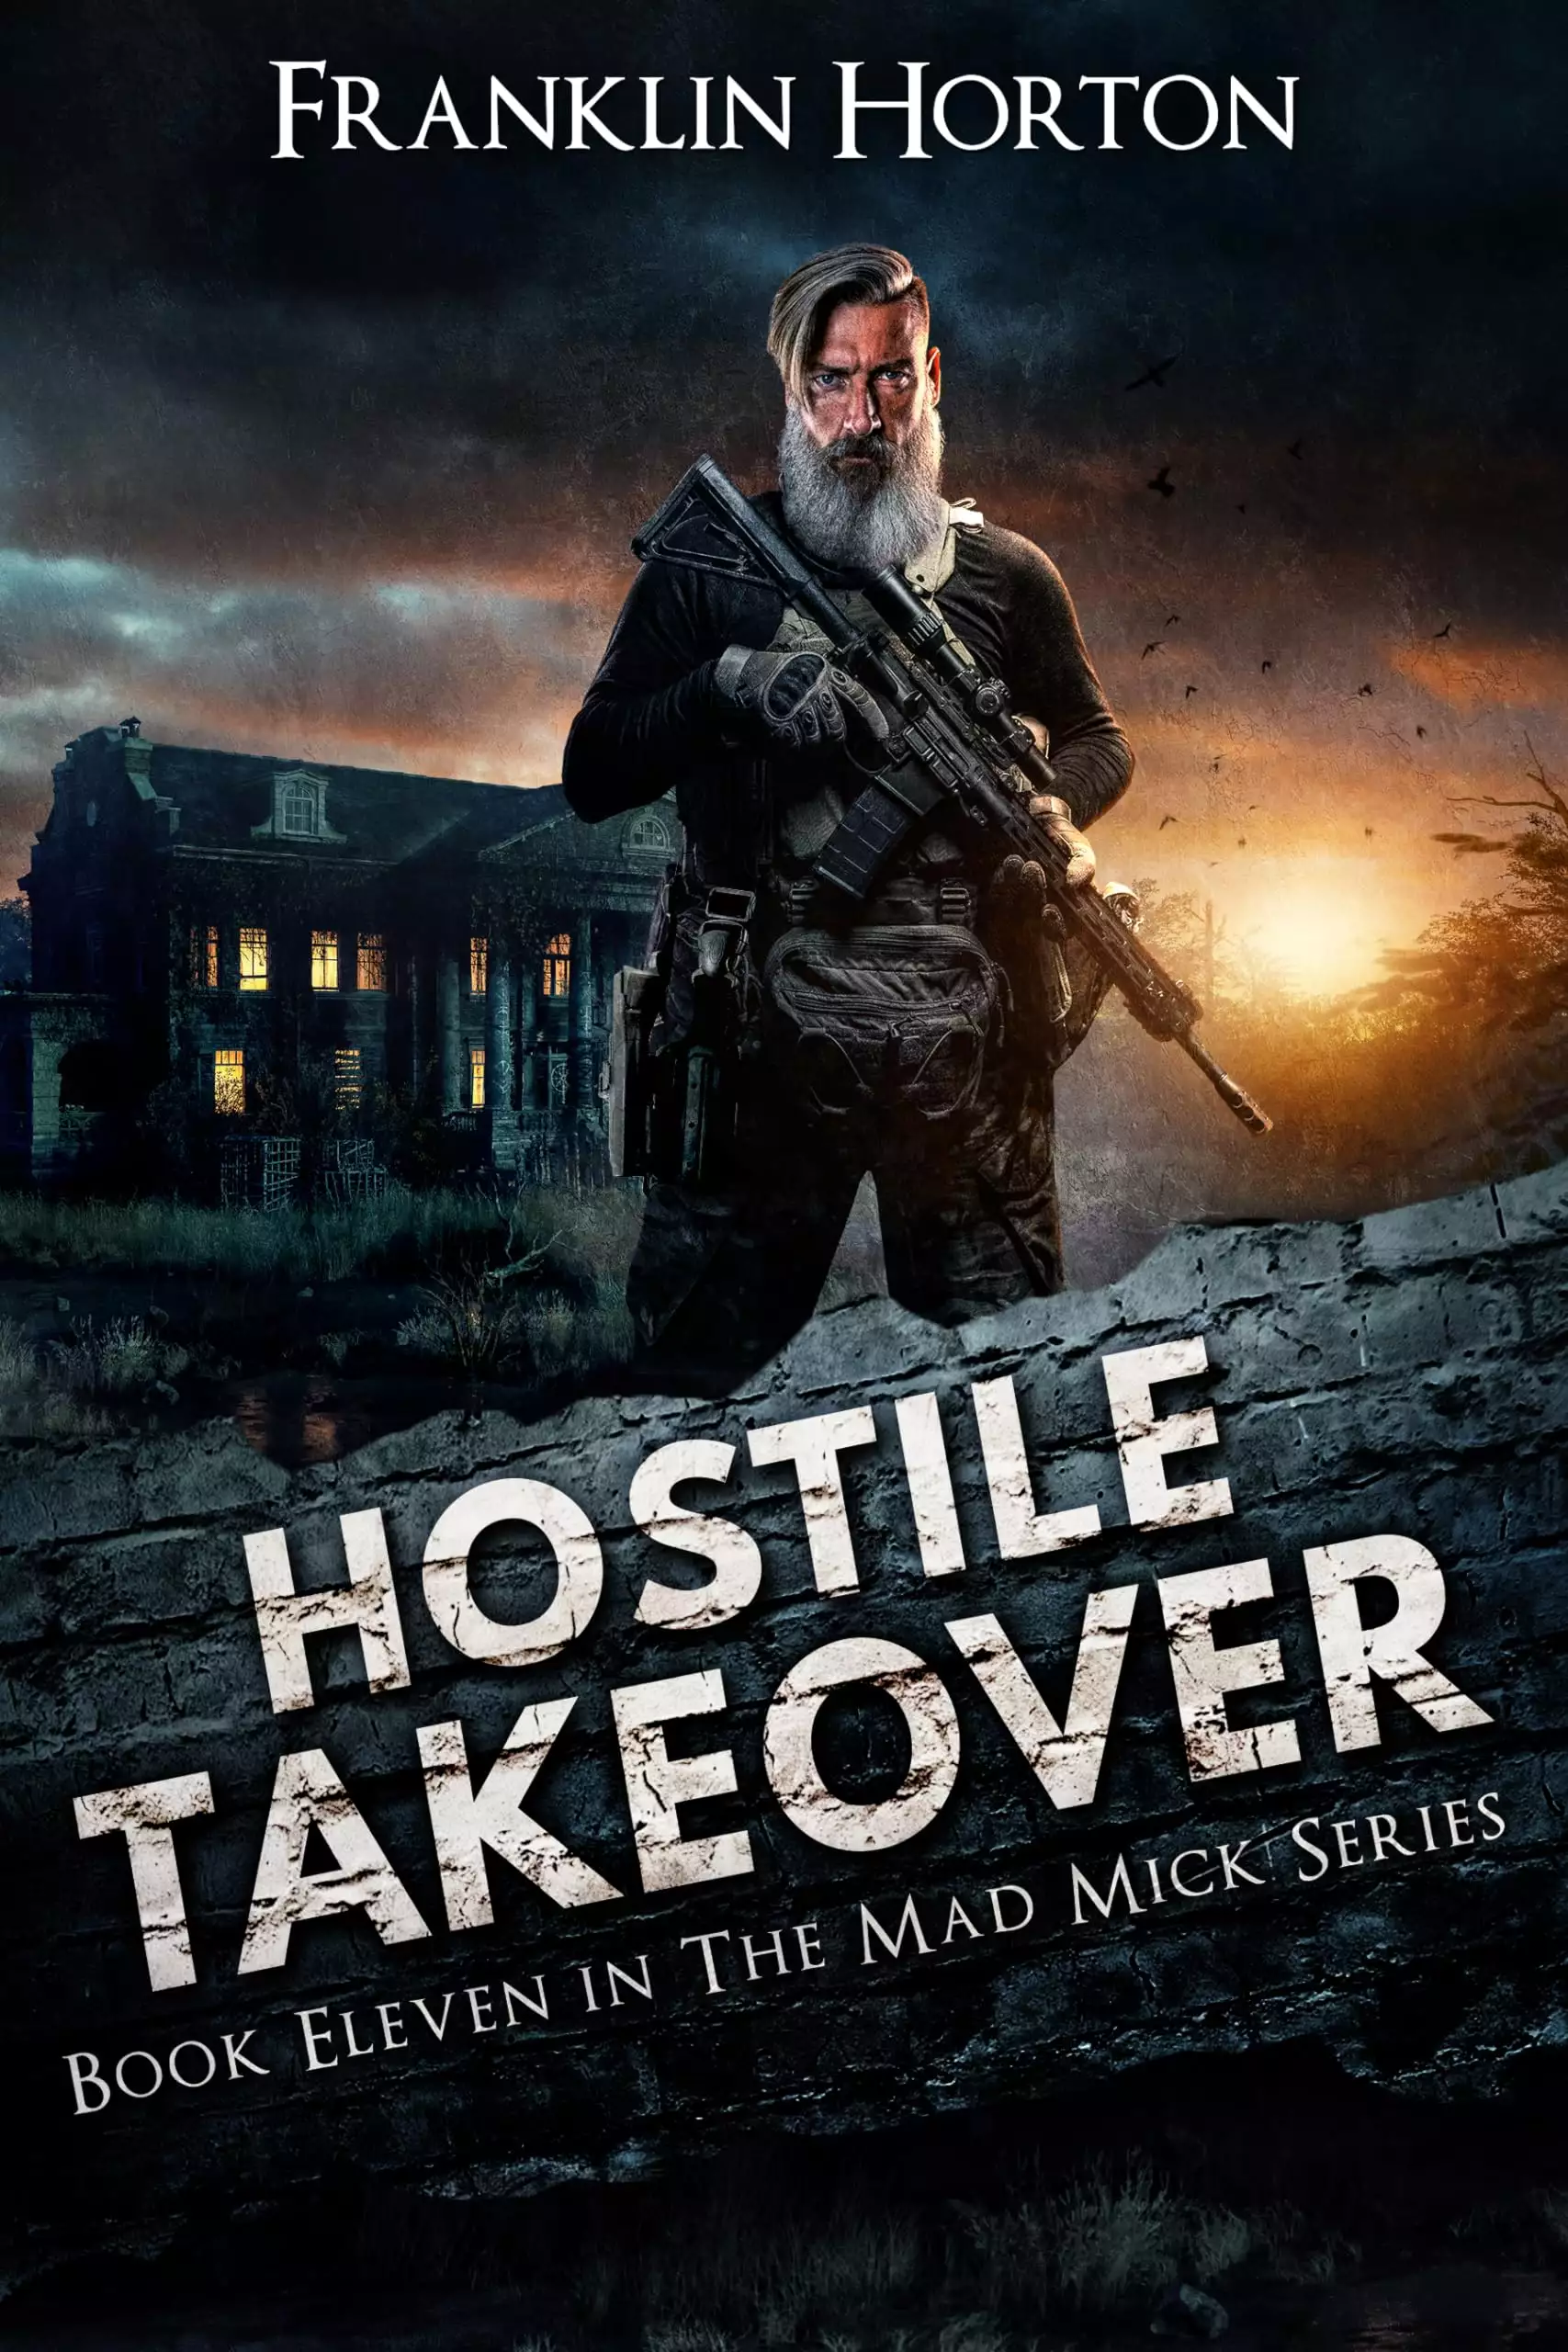 Hostile Takeover: Book Eleven in The Mad Mick Series